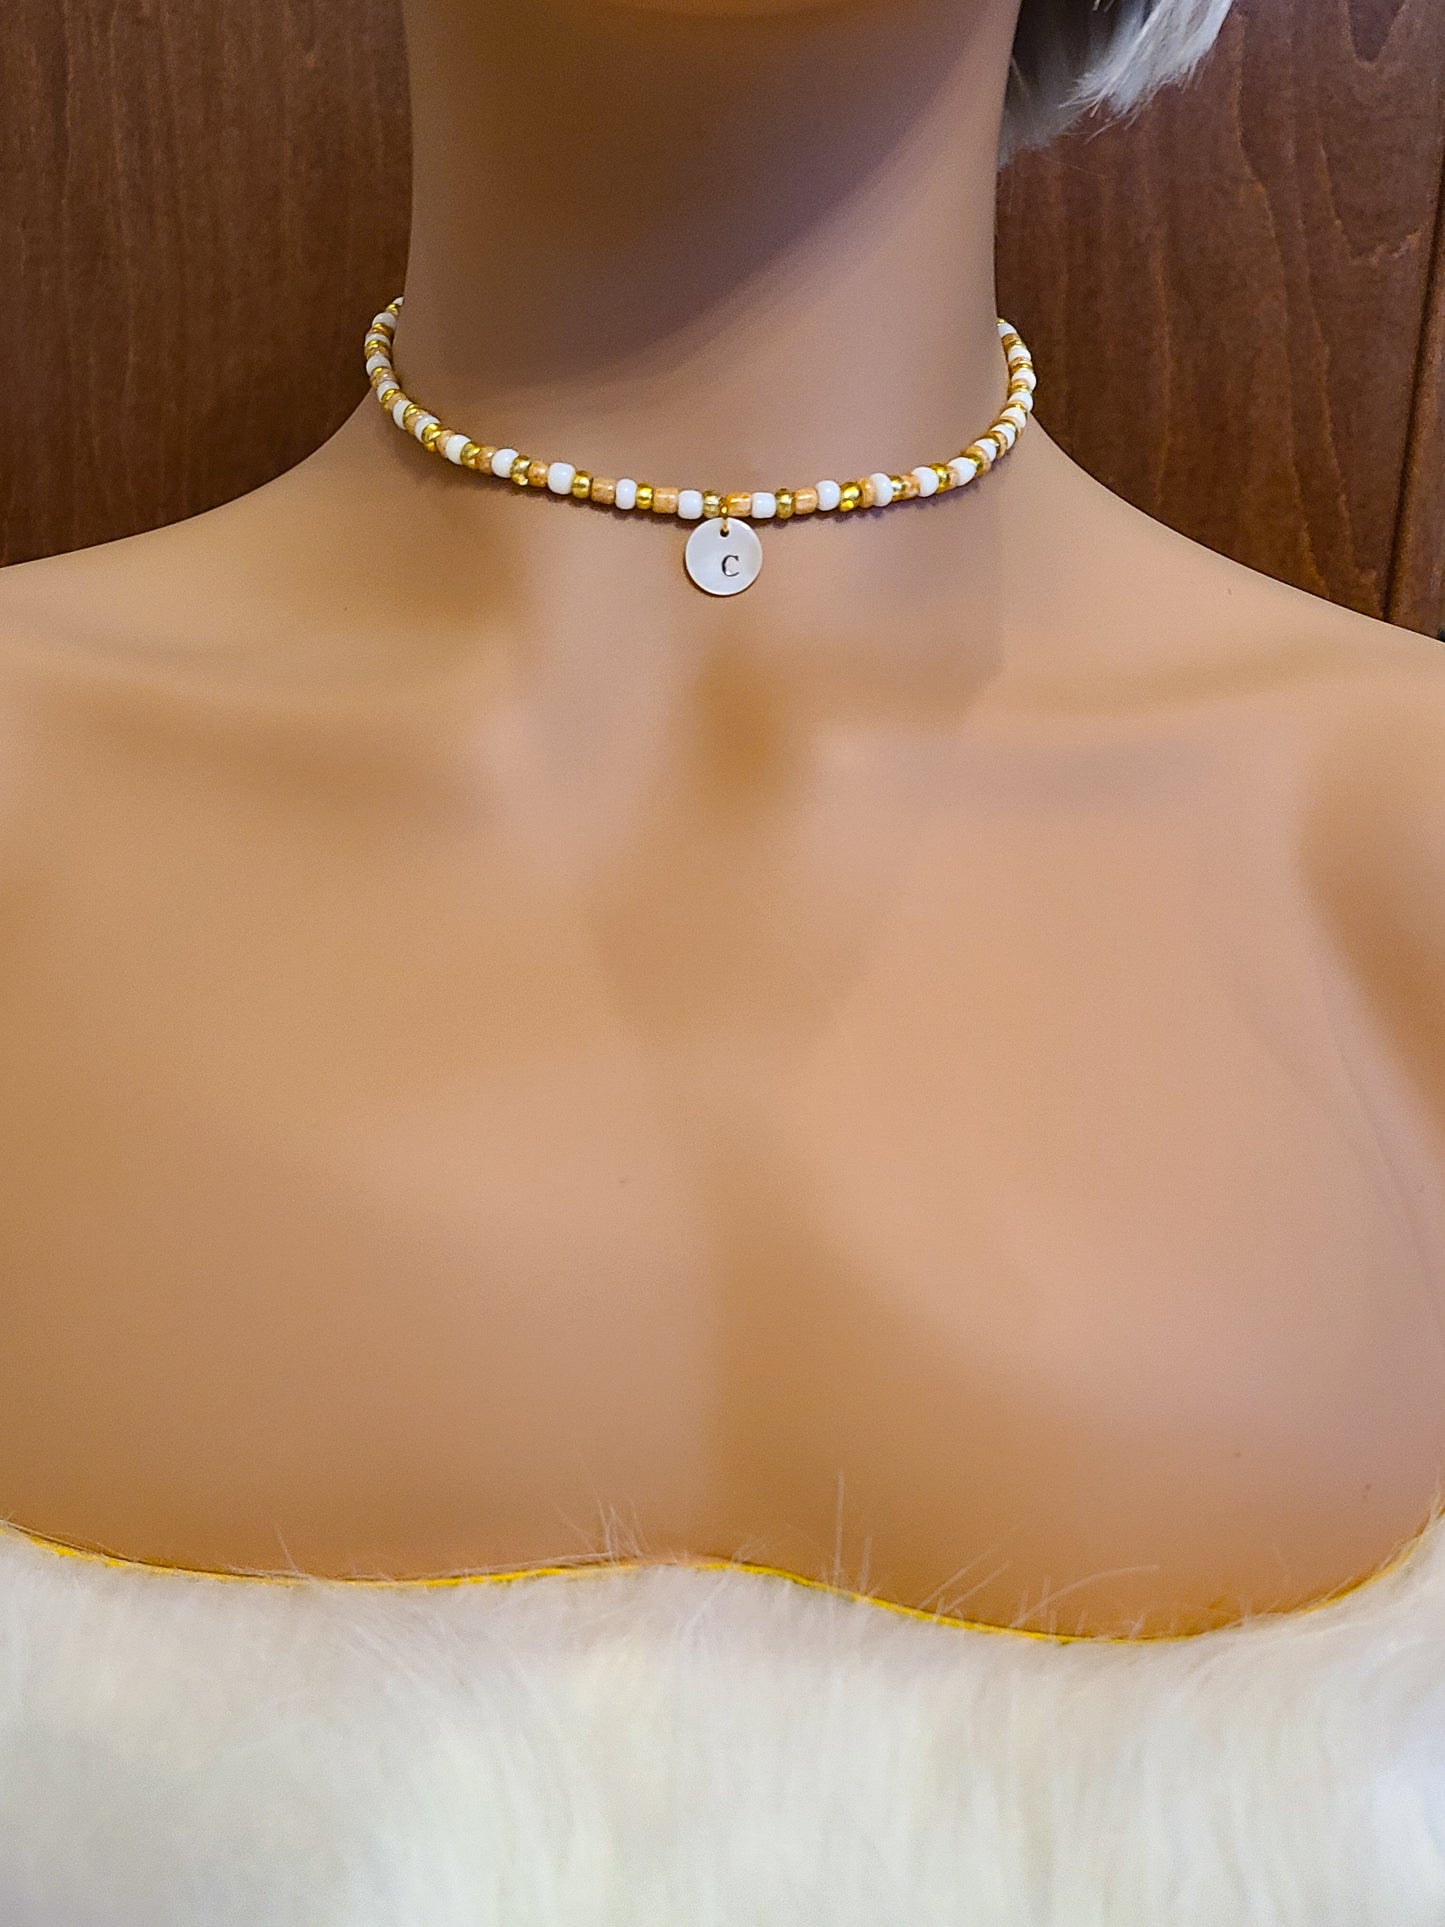 Custom Personalized Gold Initial Seed Bead Choker Necklace